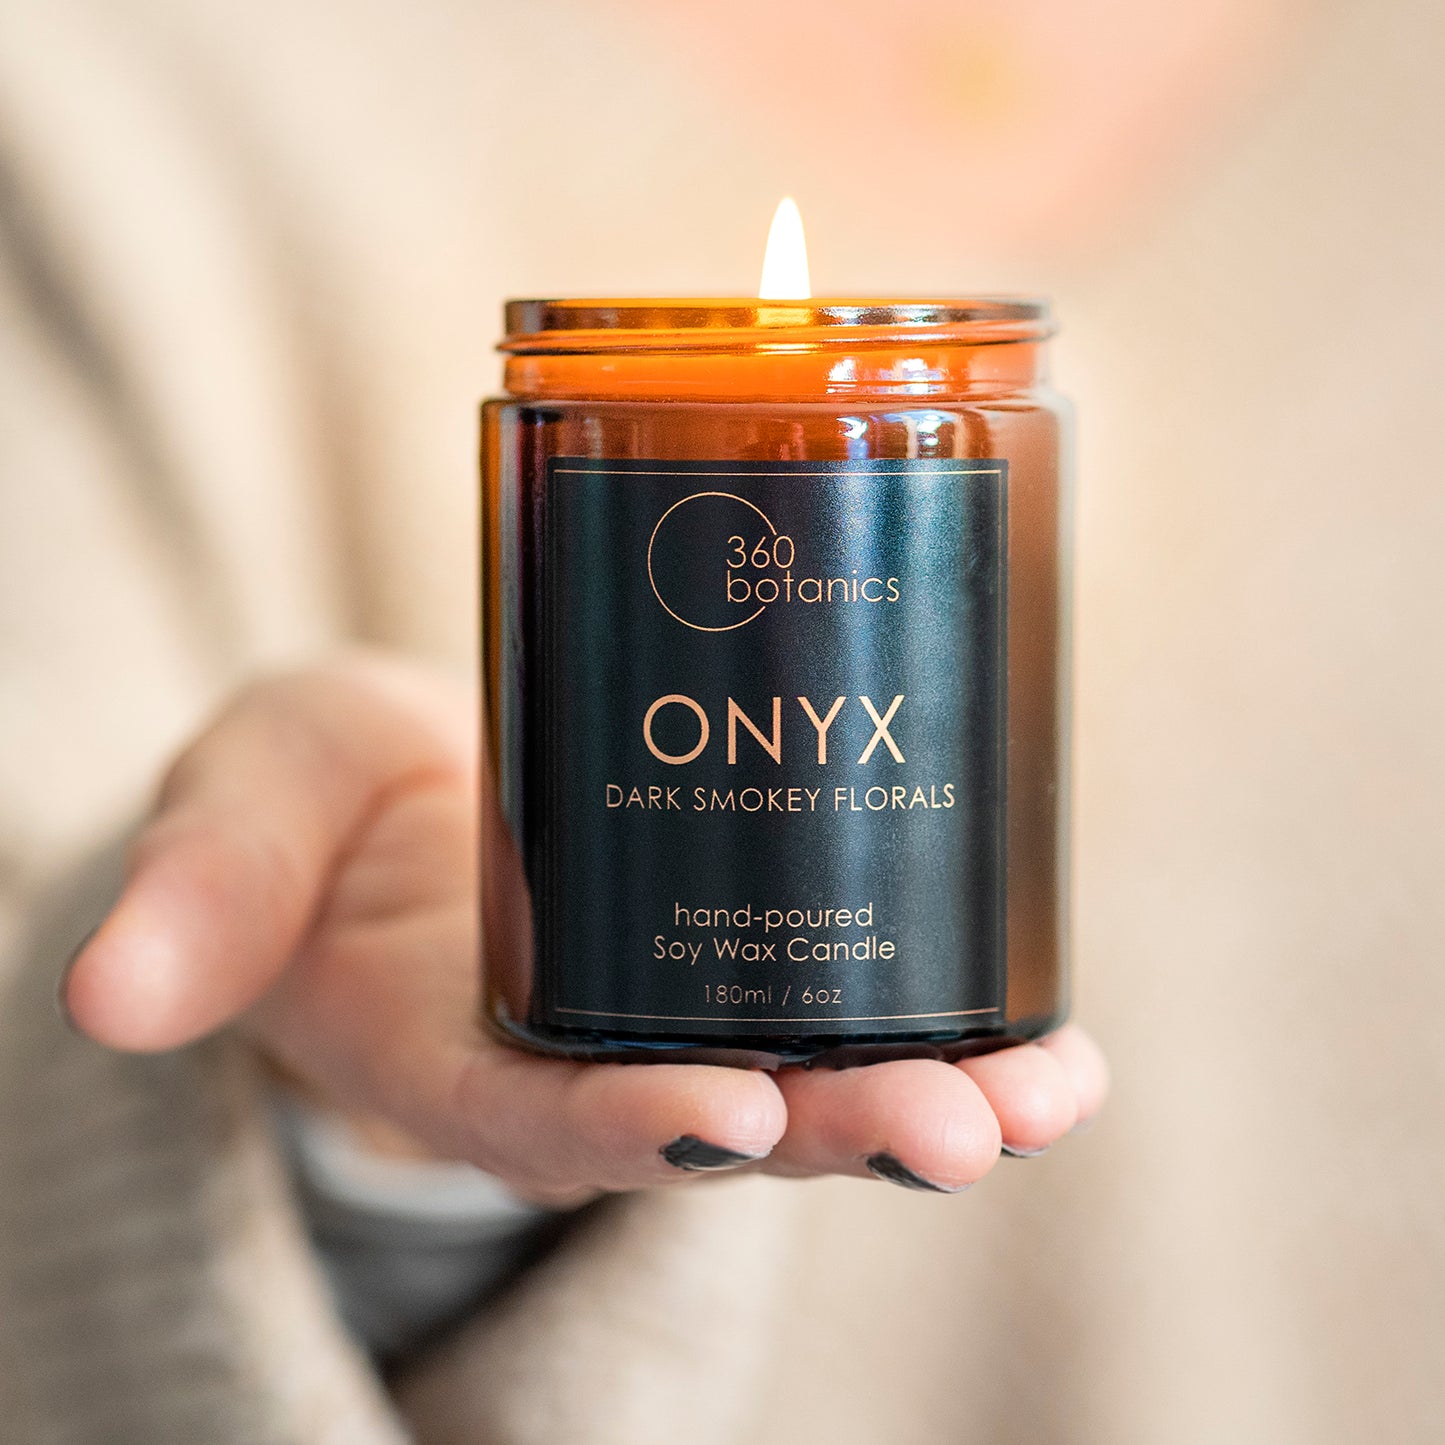 onyx soy candle, amber jar lit, held out on woman's hand